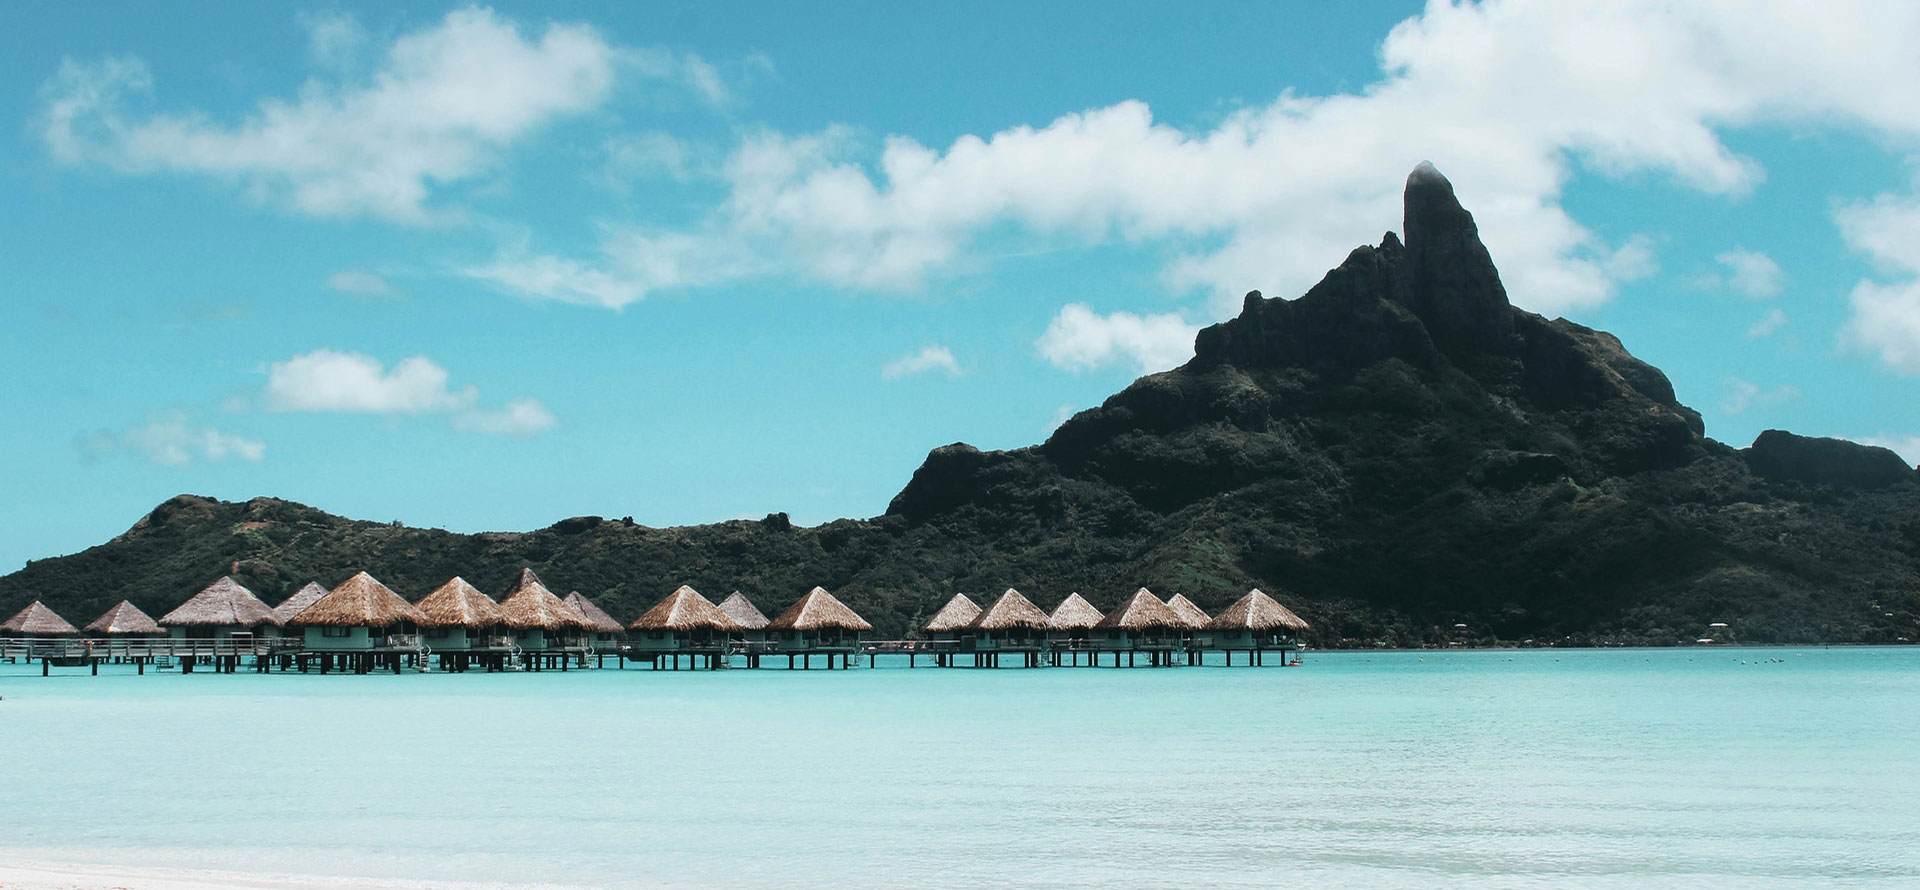 Overwater bungalows on the island.